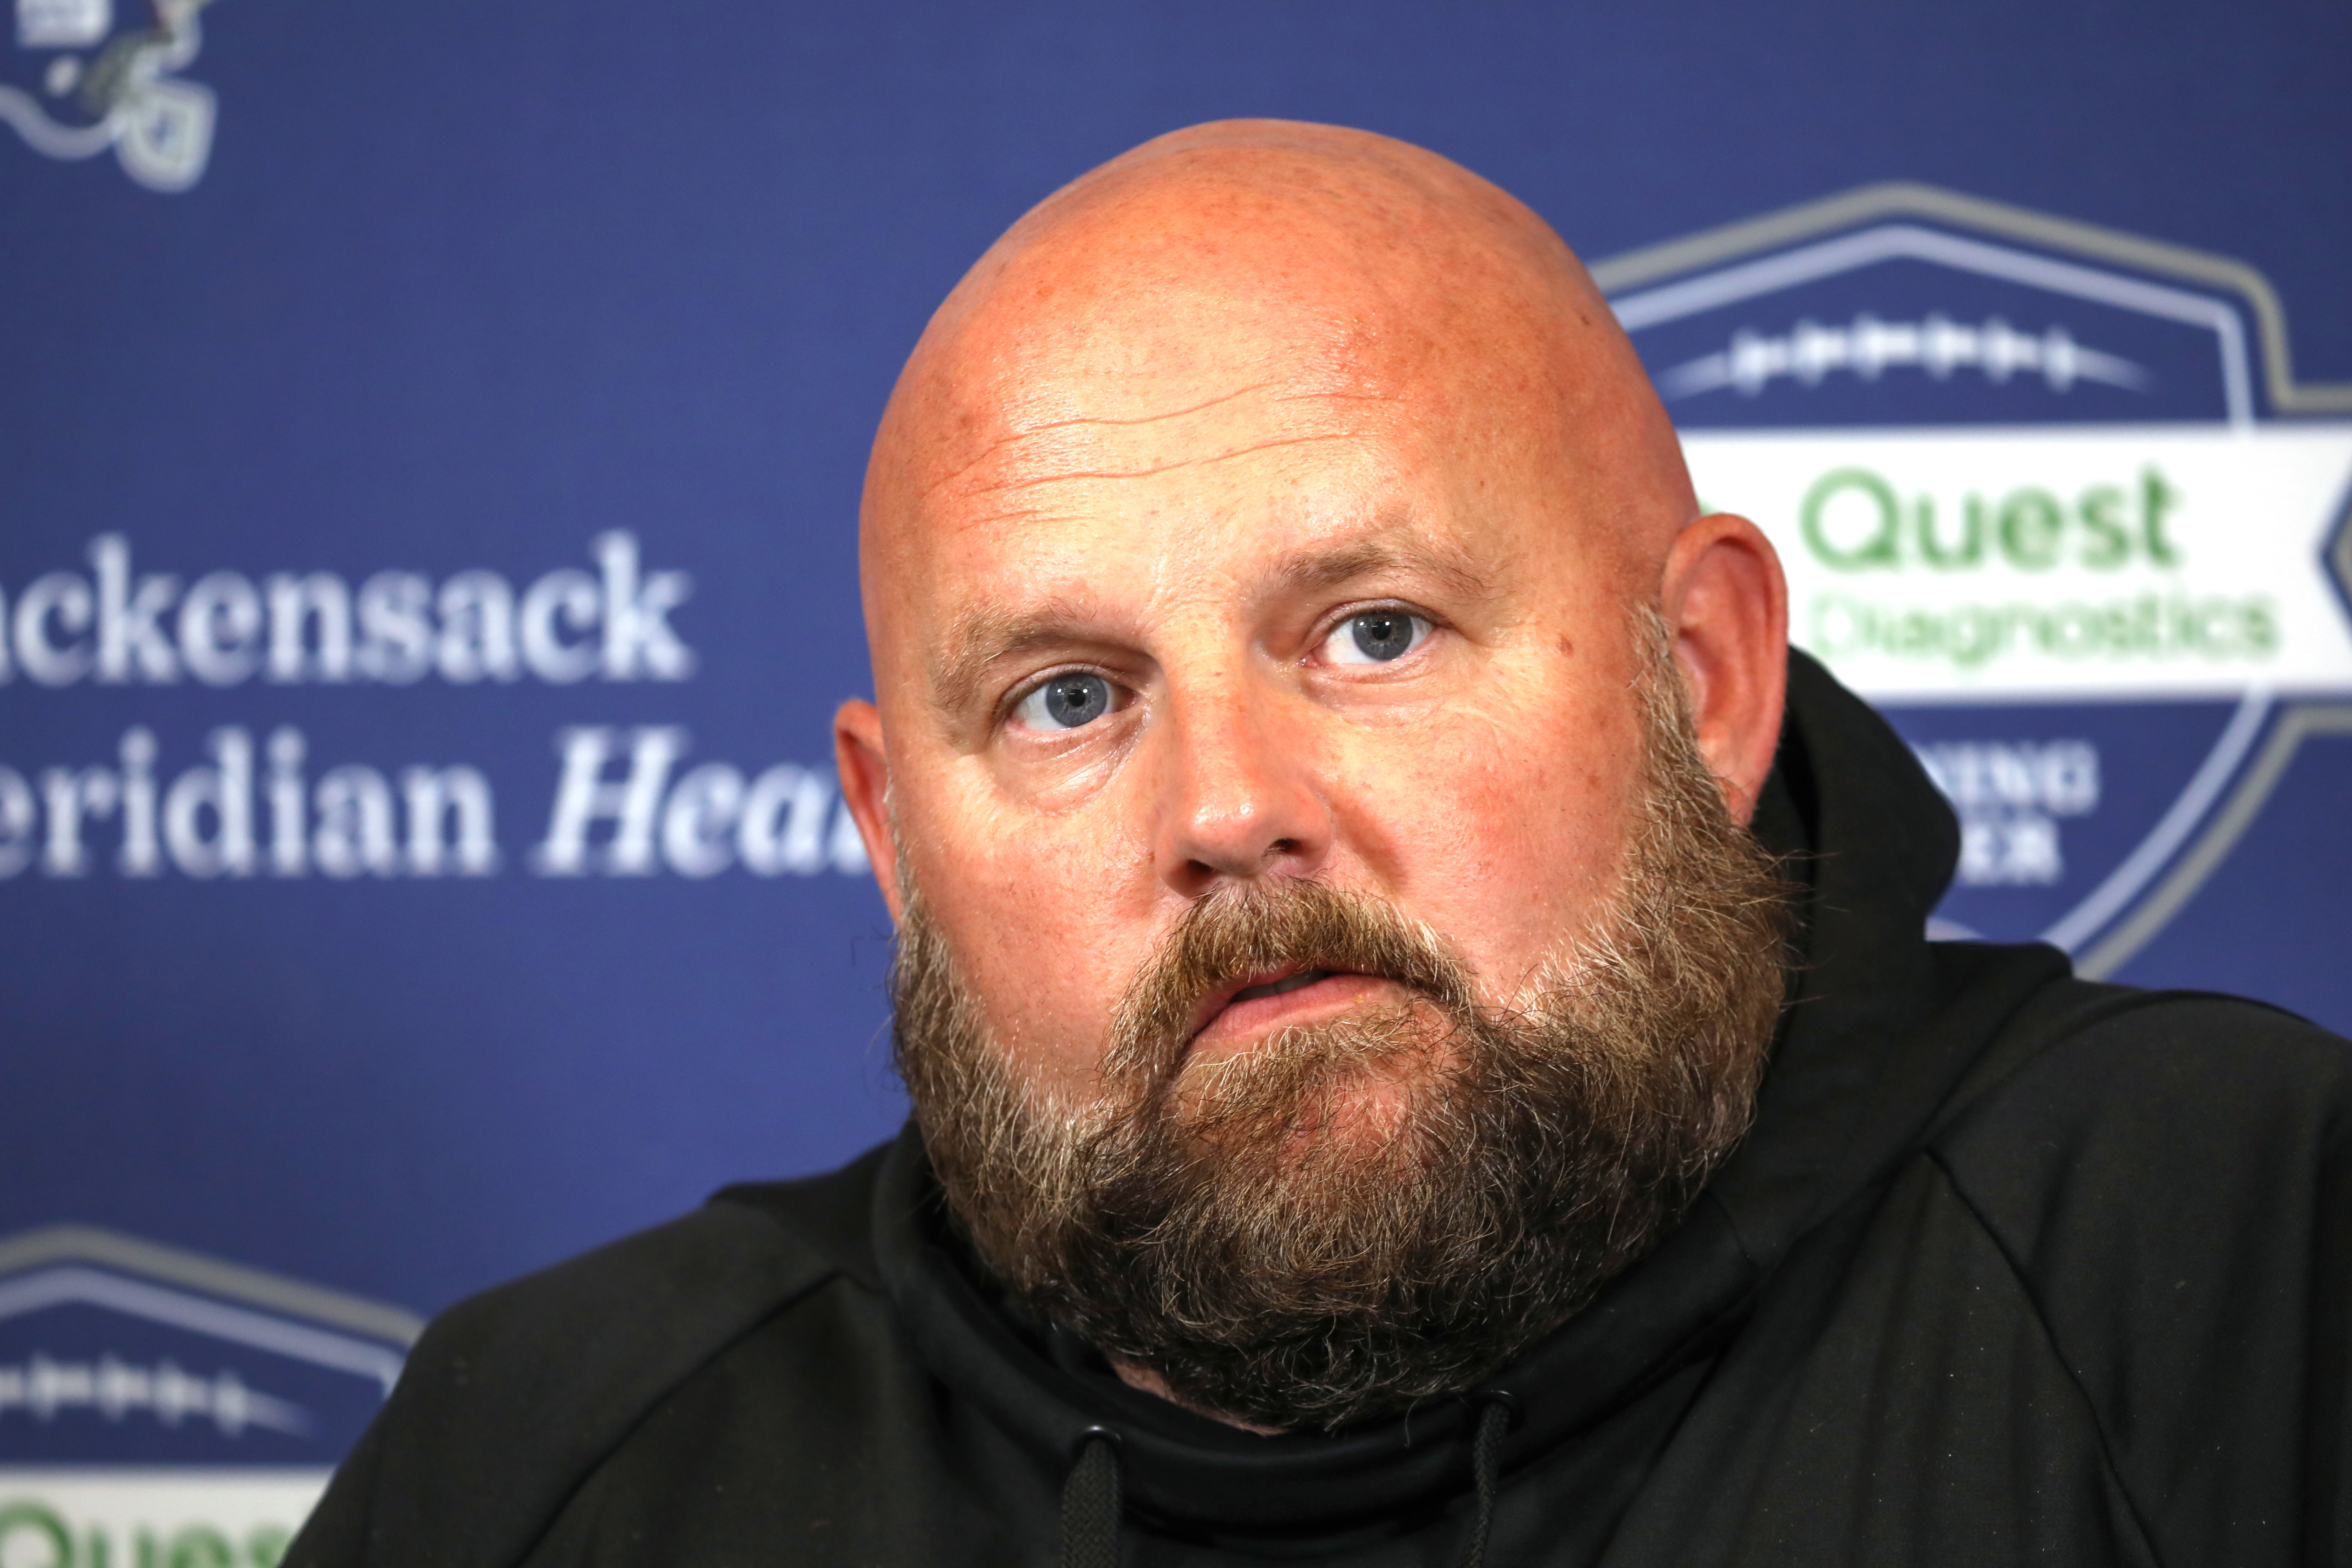 New York Giants head coach Brian Daboll speaks to the media before practice on Wednesday, Oct. 26, 2022. Daboll and the Giants (6-1) will travel to Seattle to play the Seahawks Sunday.